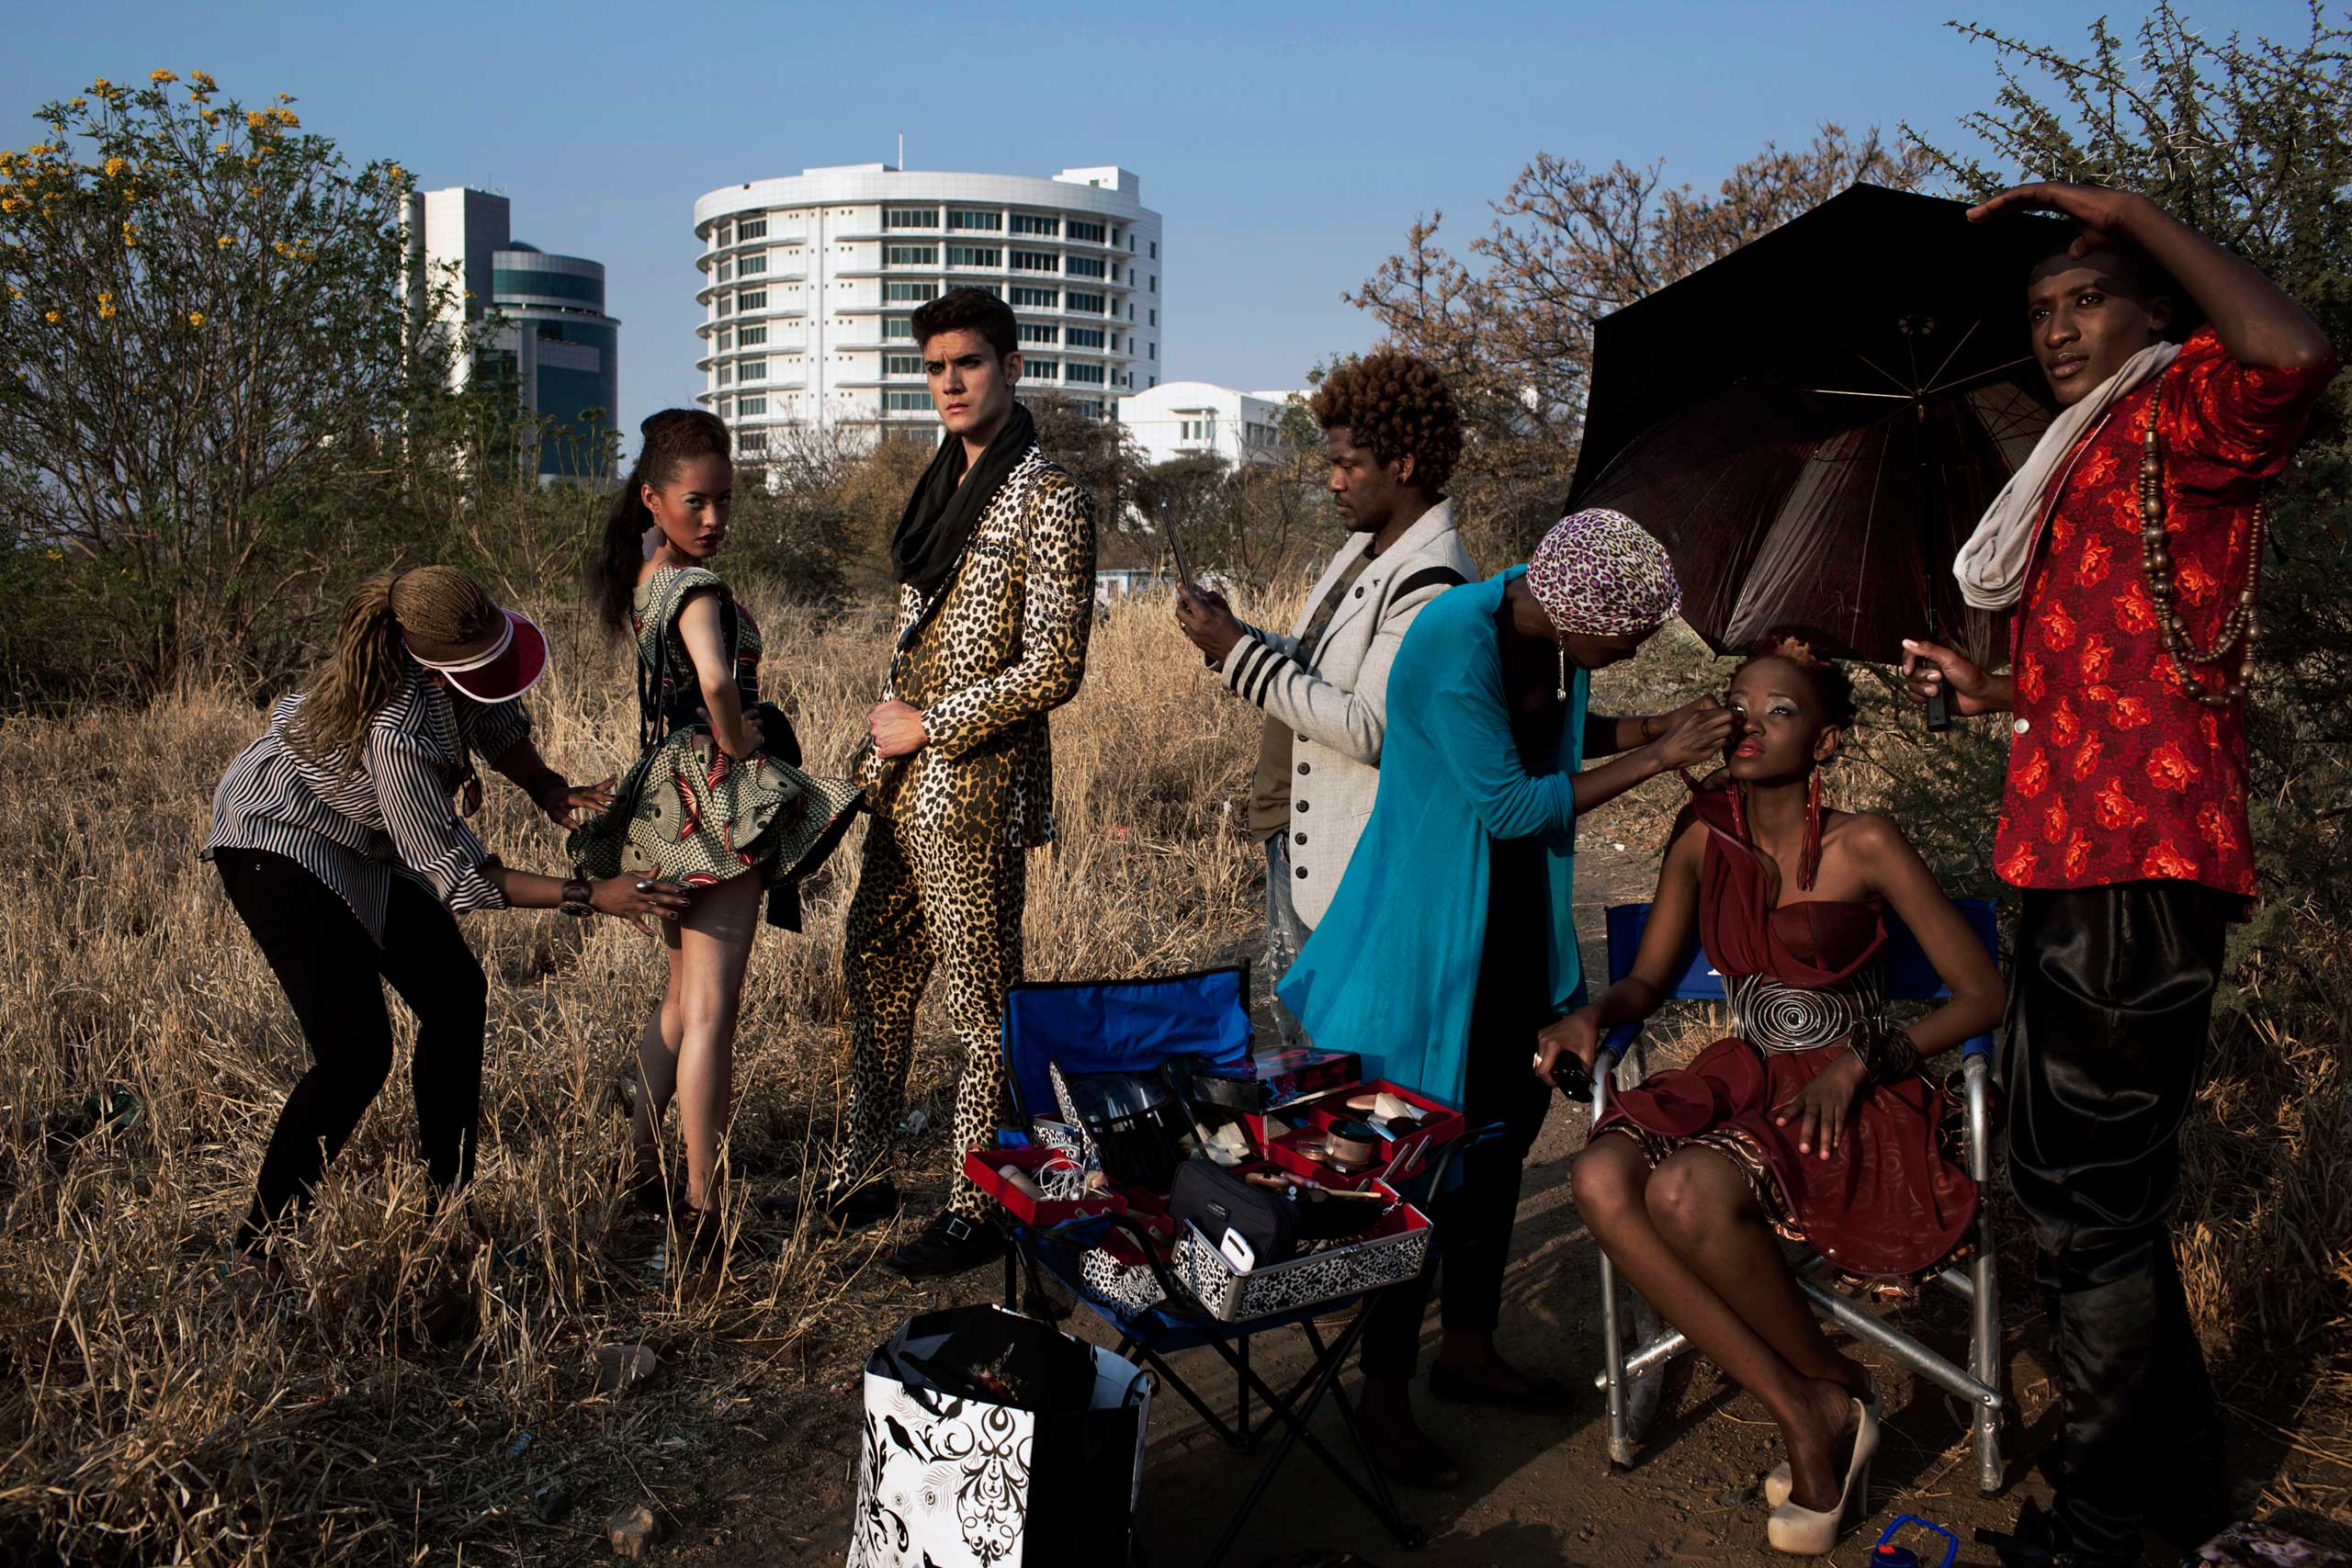 Fashion designer Blacktrash on a location shoot with his models on Aug. 28, 2012 in Gaborone, Botswana.